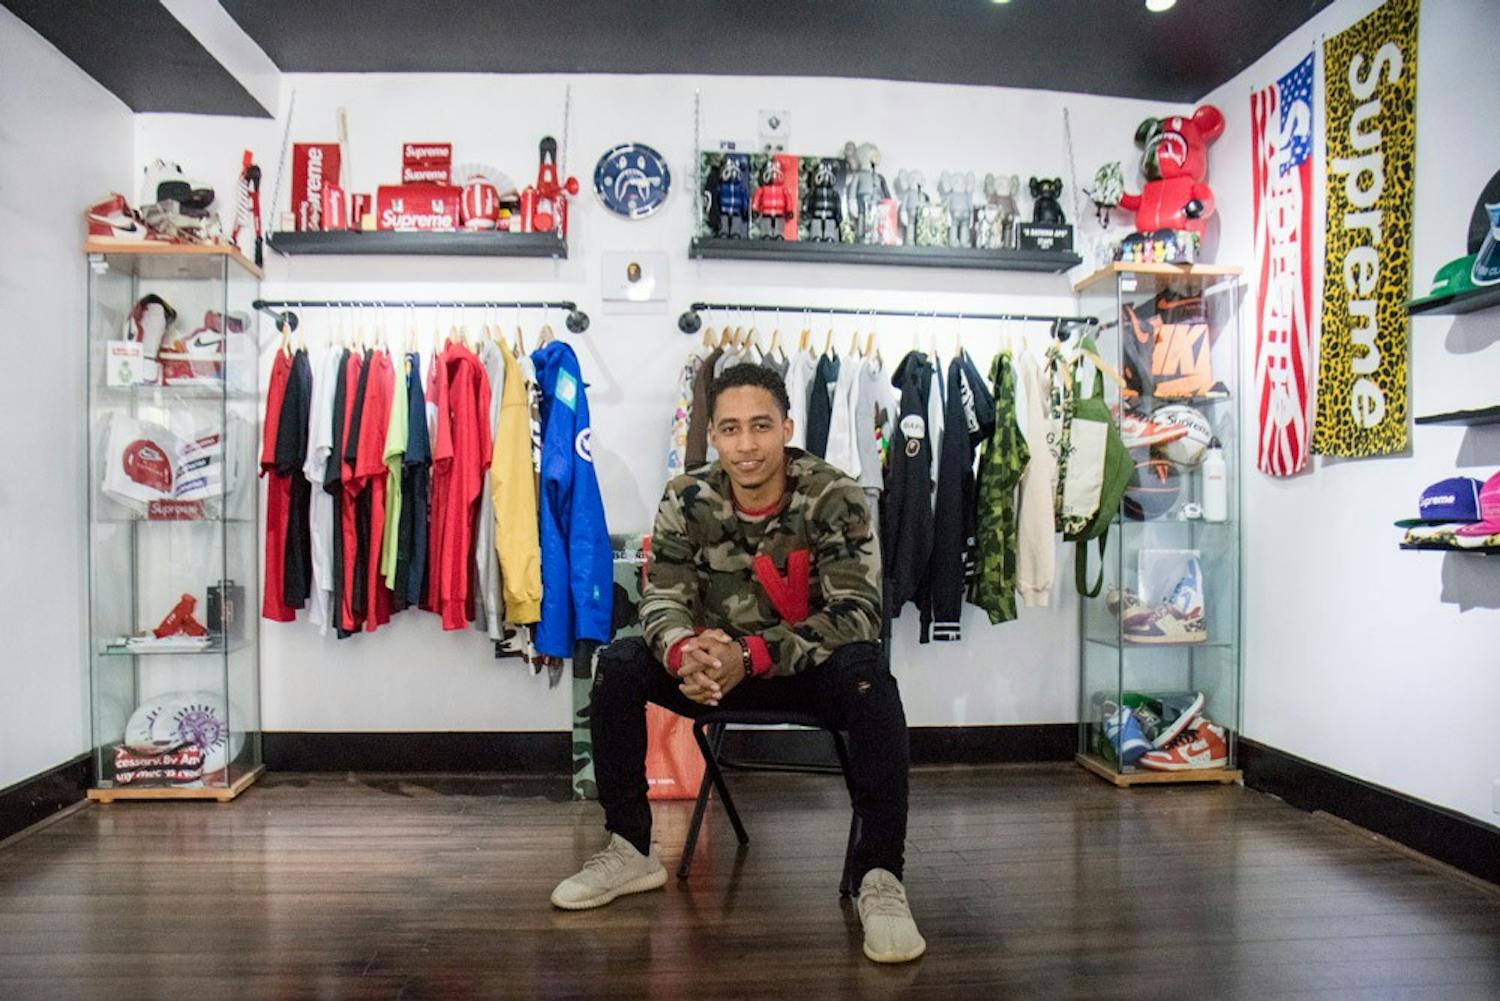 Yusef Burgos sits in his new clothing store The Cellar on Elmwood Avenue. The store features high-end clothing and shoes from brands like Bape, Supreme, Nike and Adidas.